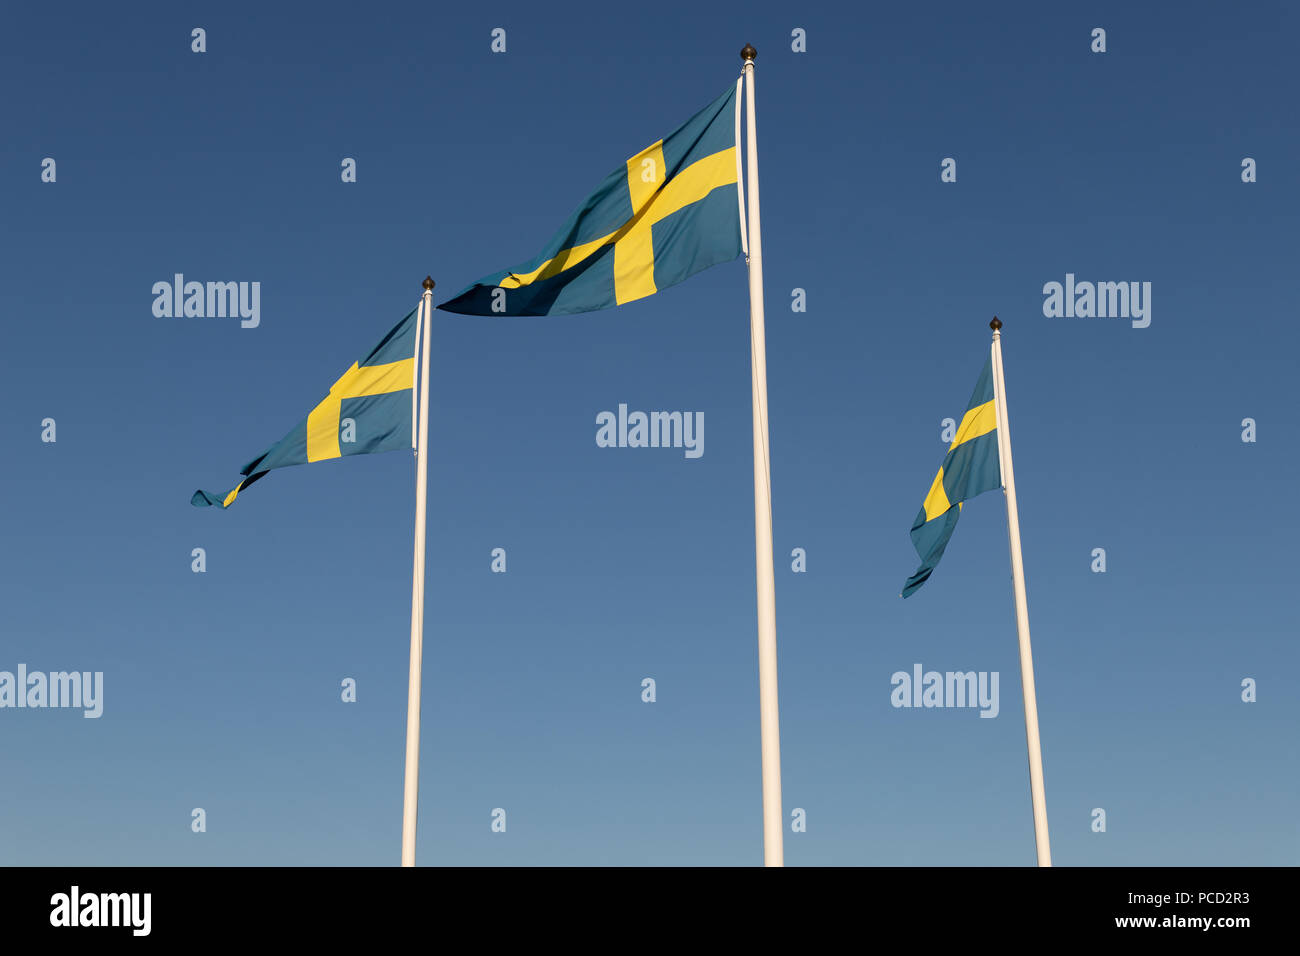 Thre flags from Sweden waving in the air Stock Photo